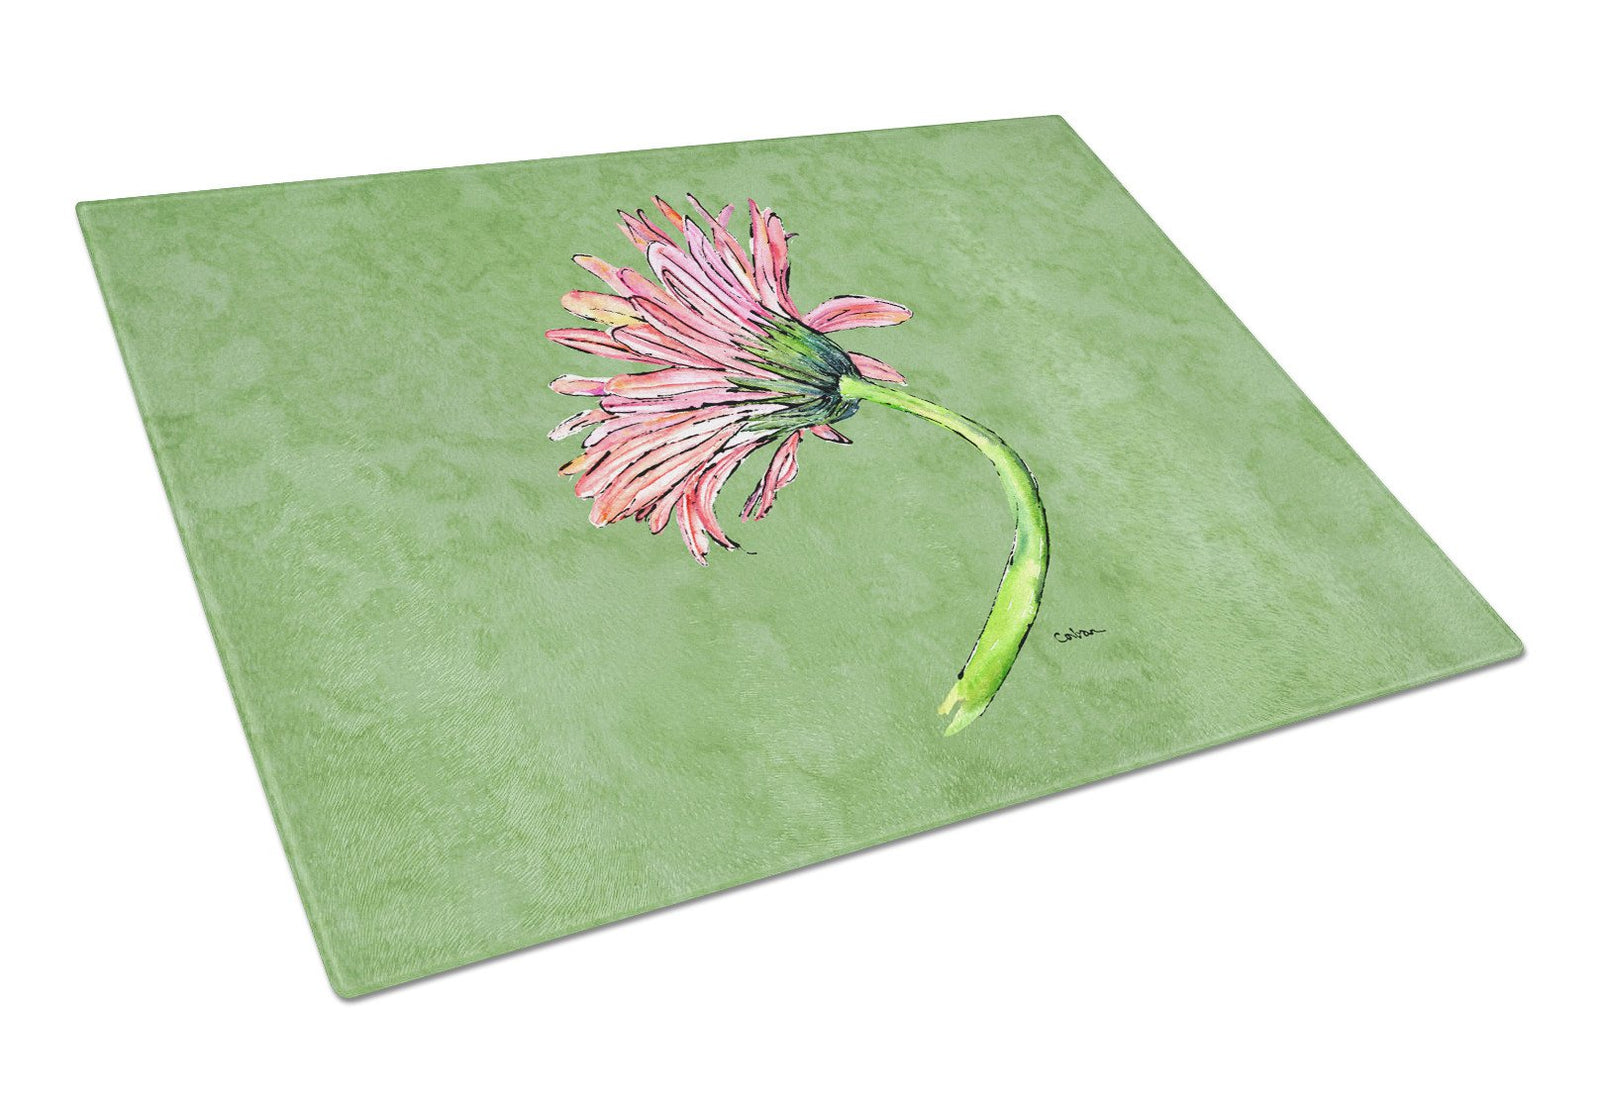 Gerber Daisy Pink Glass Cutting Board Large by Caroline's Treasures